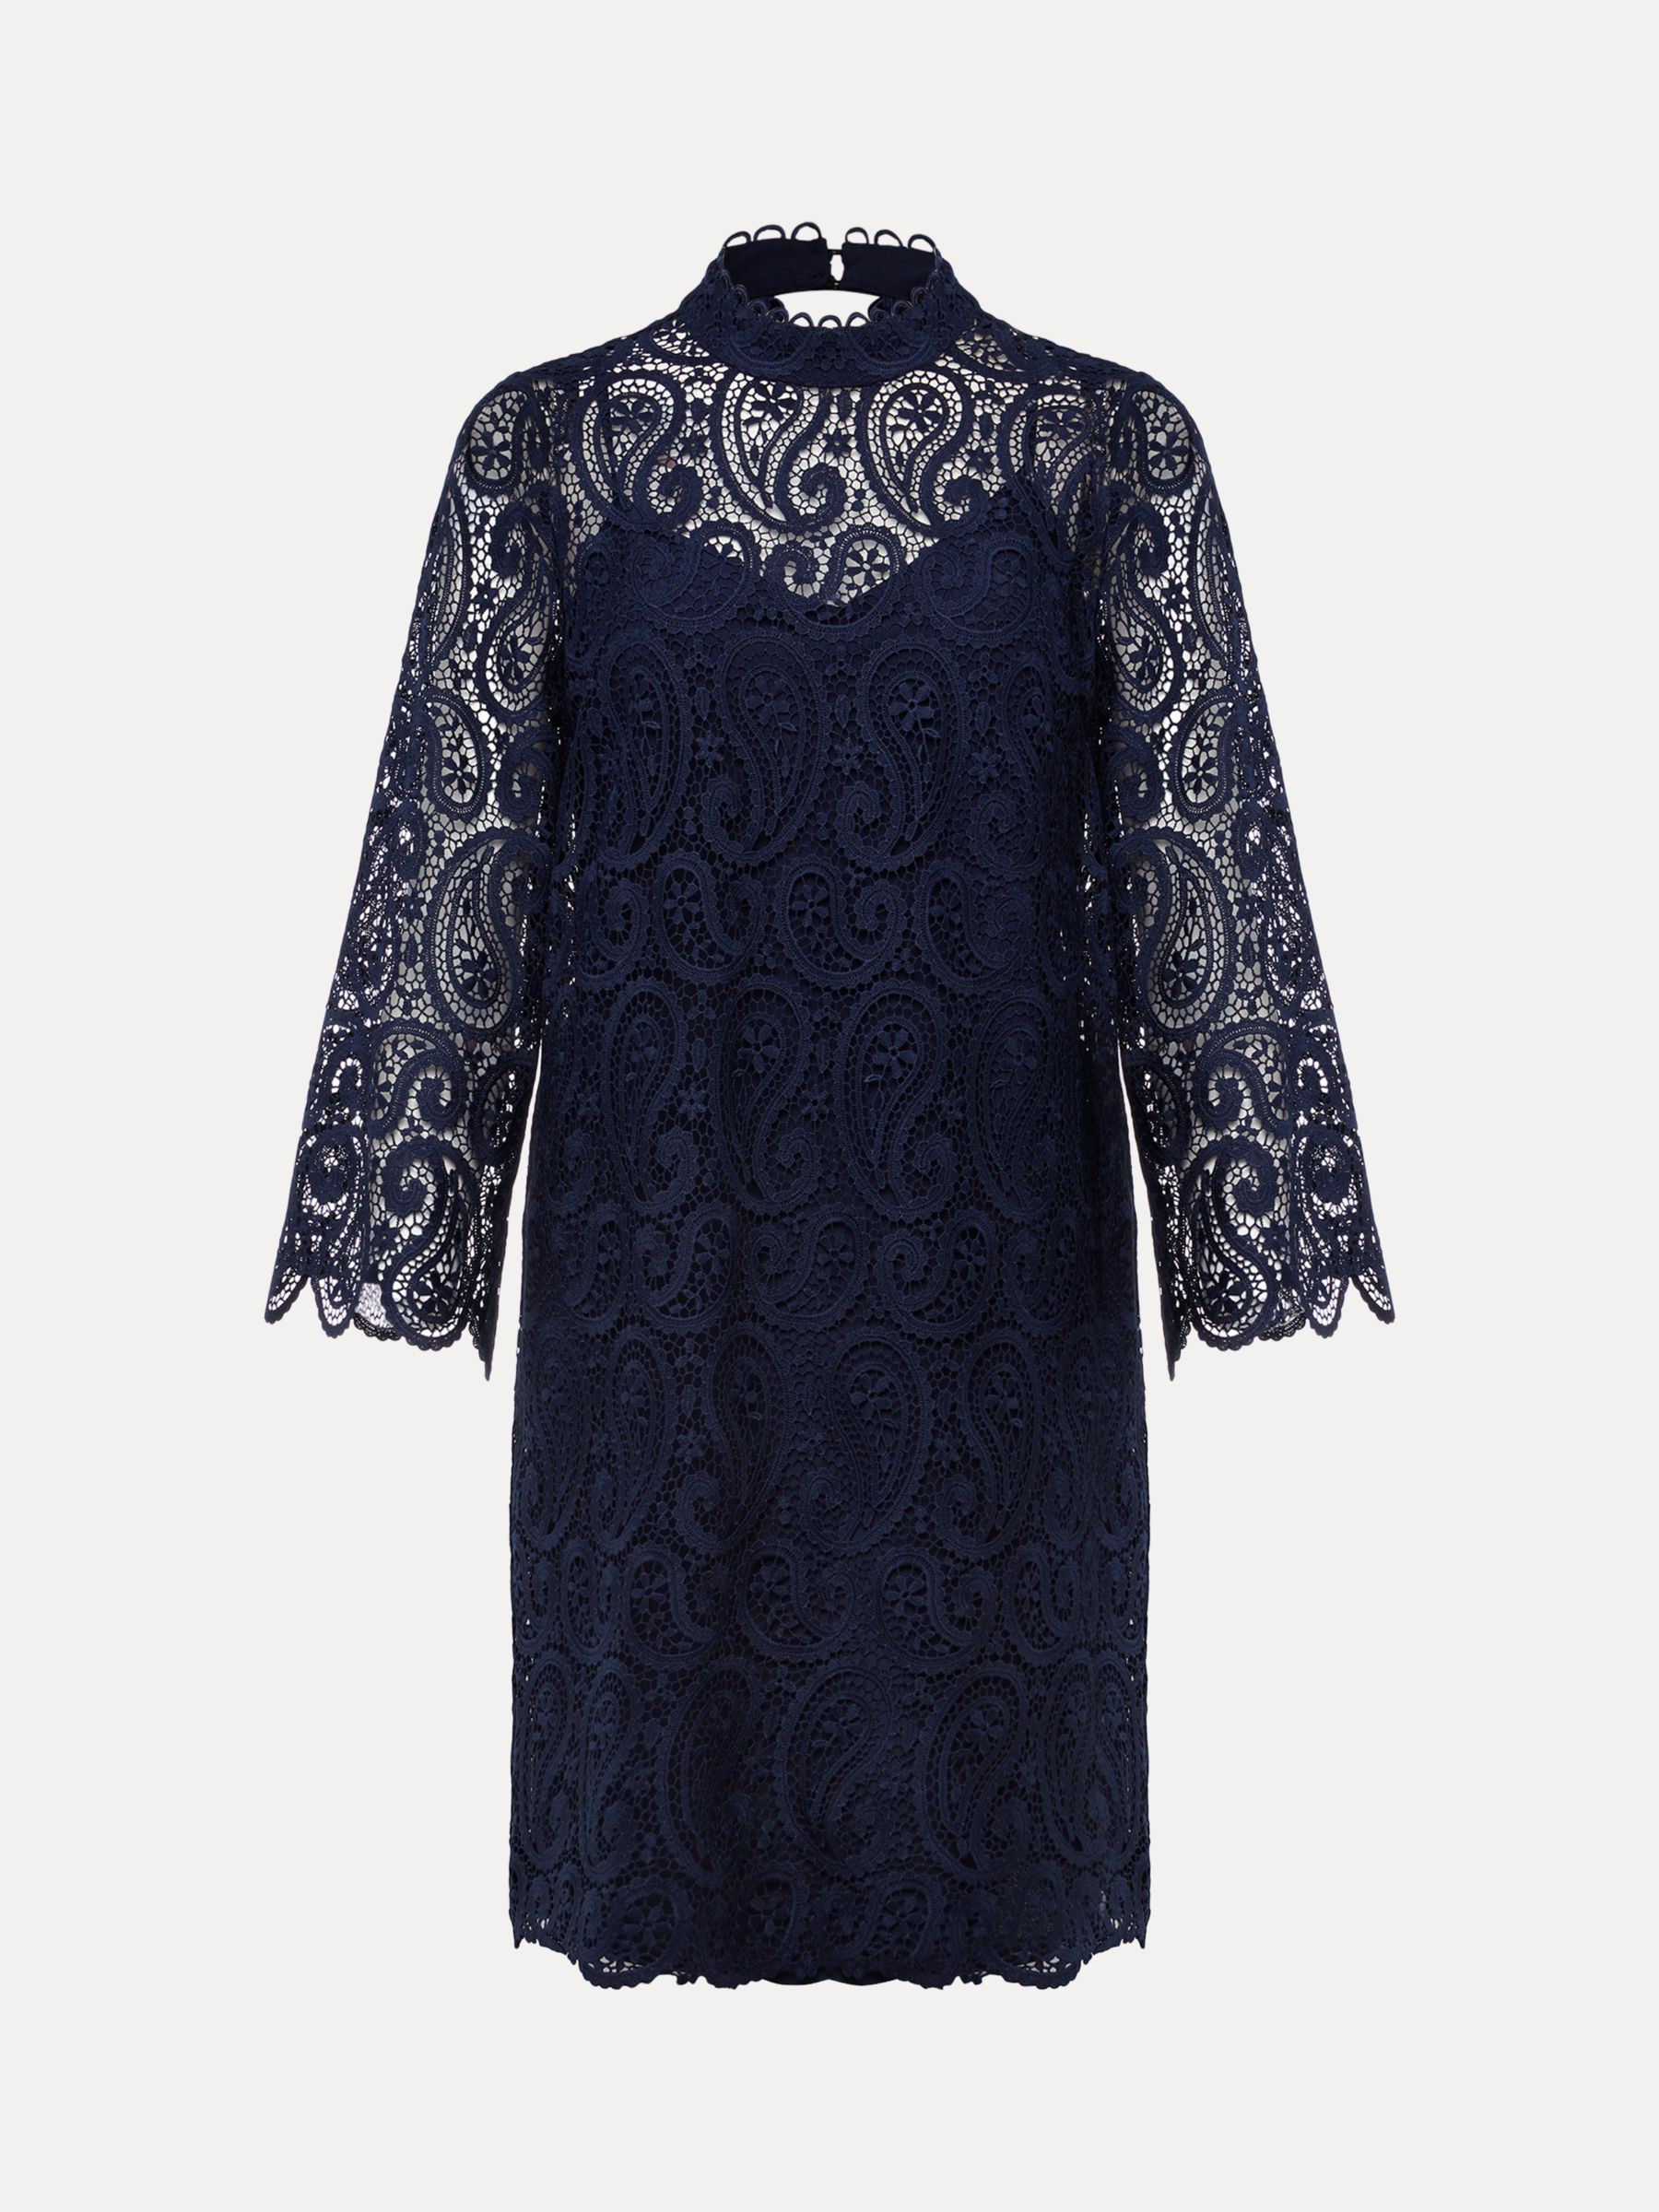 Buy Phase Eight Verity Lace Dress Online at johnlewis.com